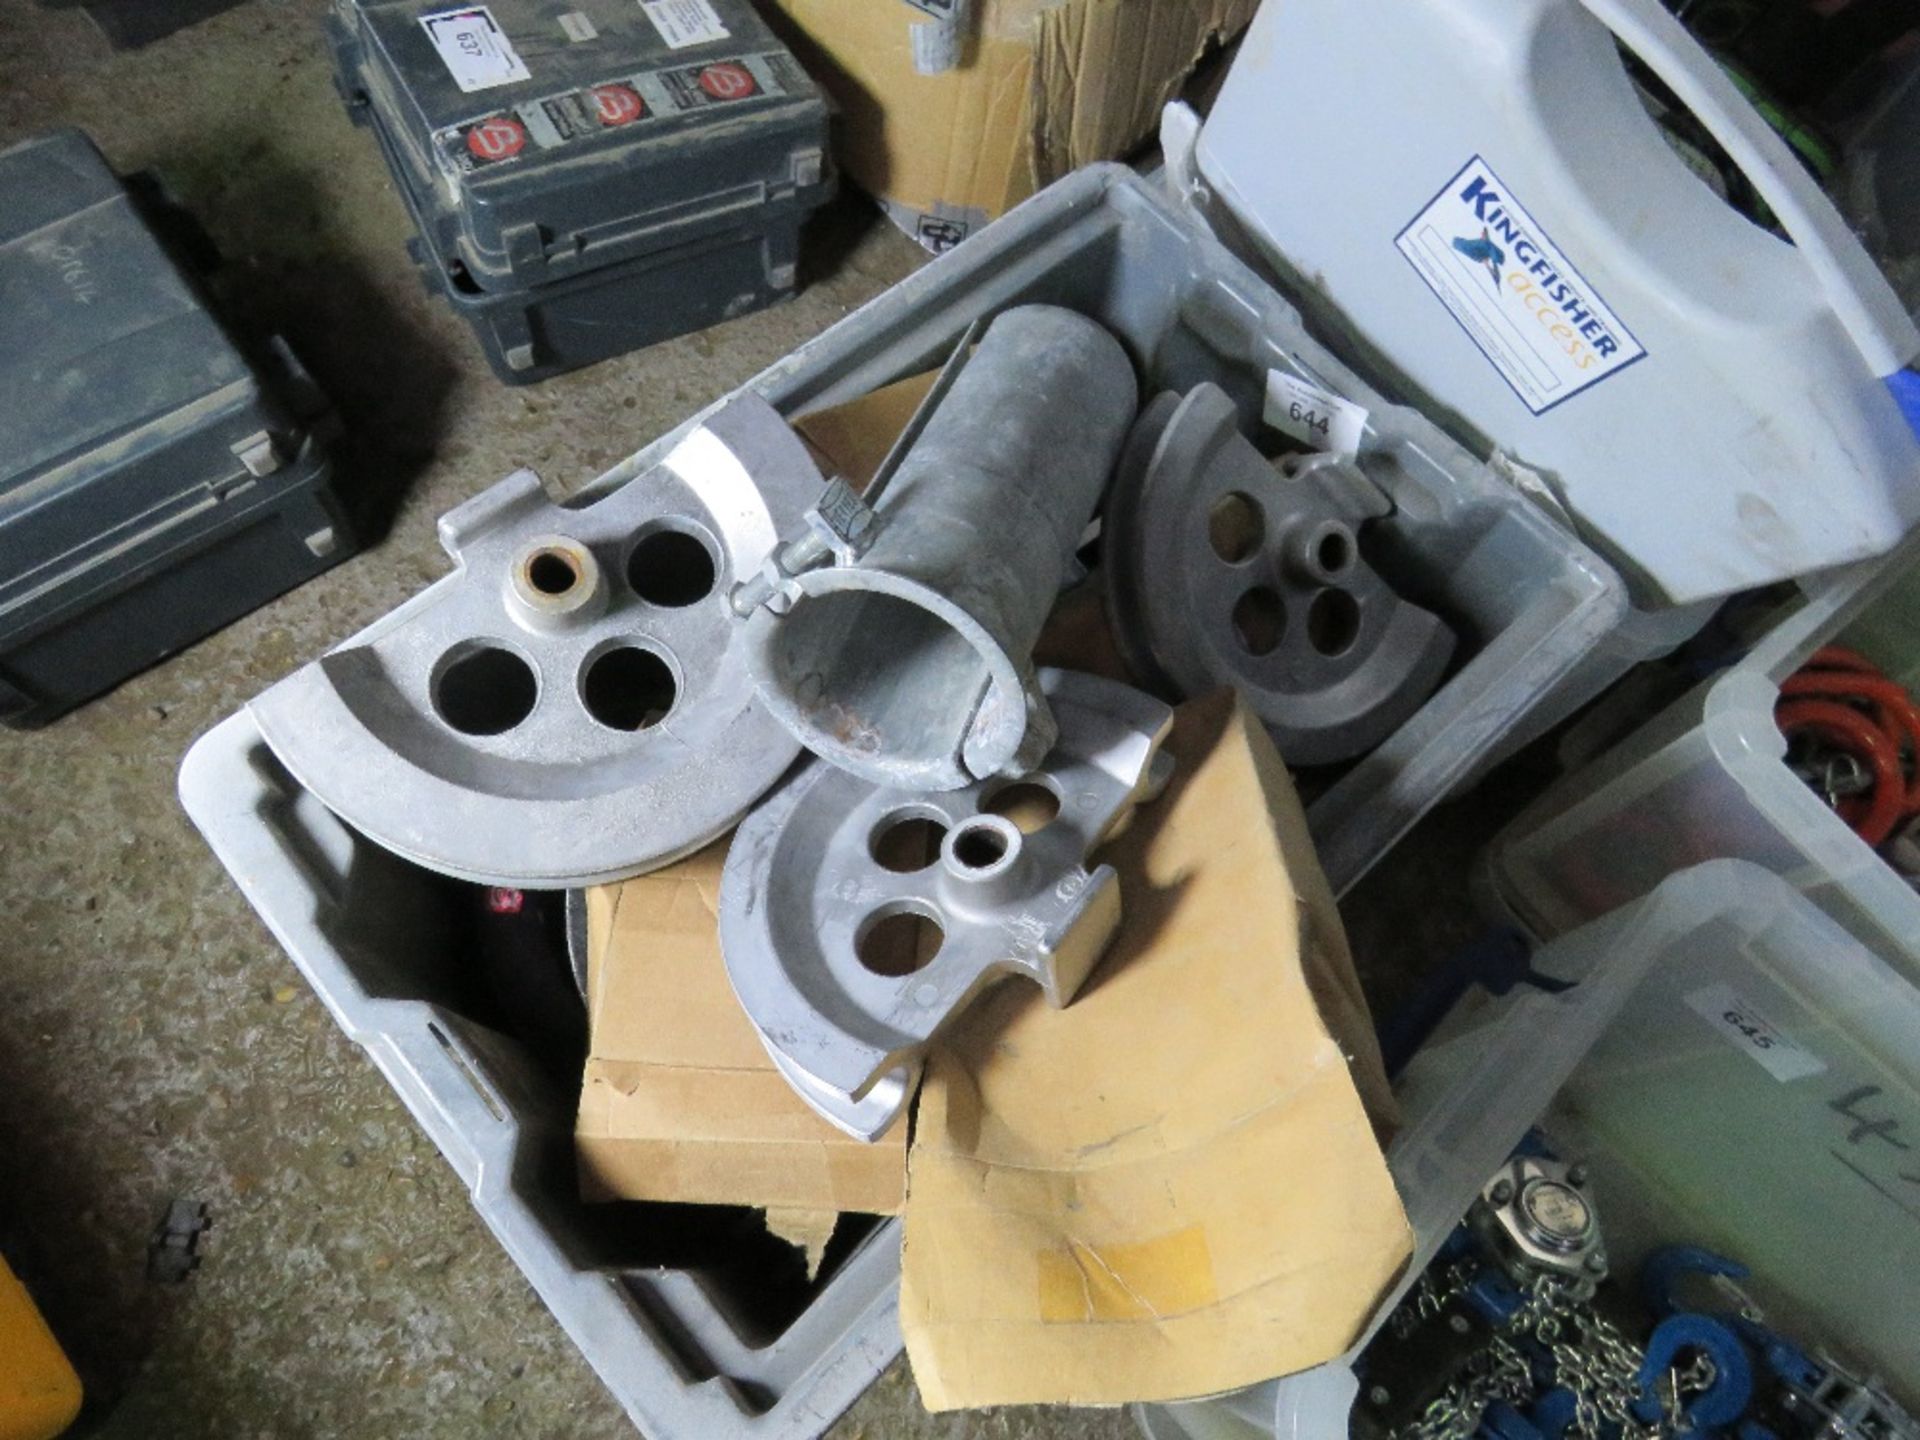 BOX OF PIPE BENDING DIES. SOURCED FROM DEPOT CLEARANCE DUE TO A CHANGE IN COMPANY POLICY.